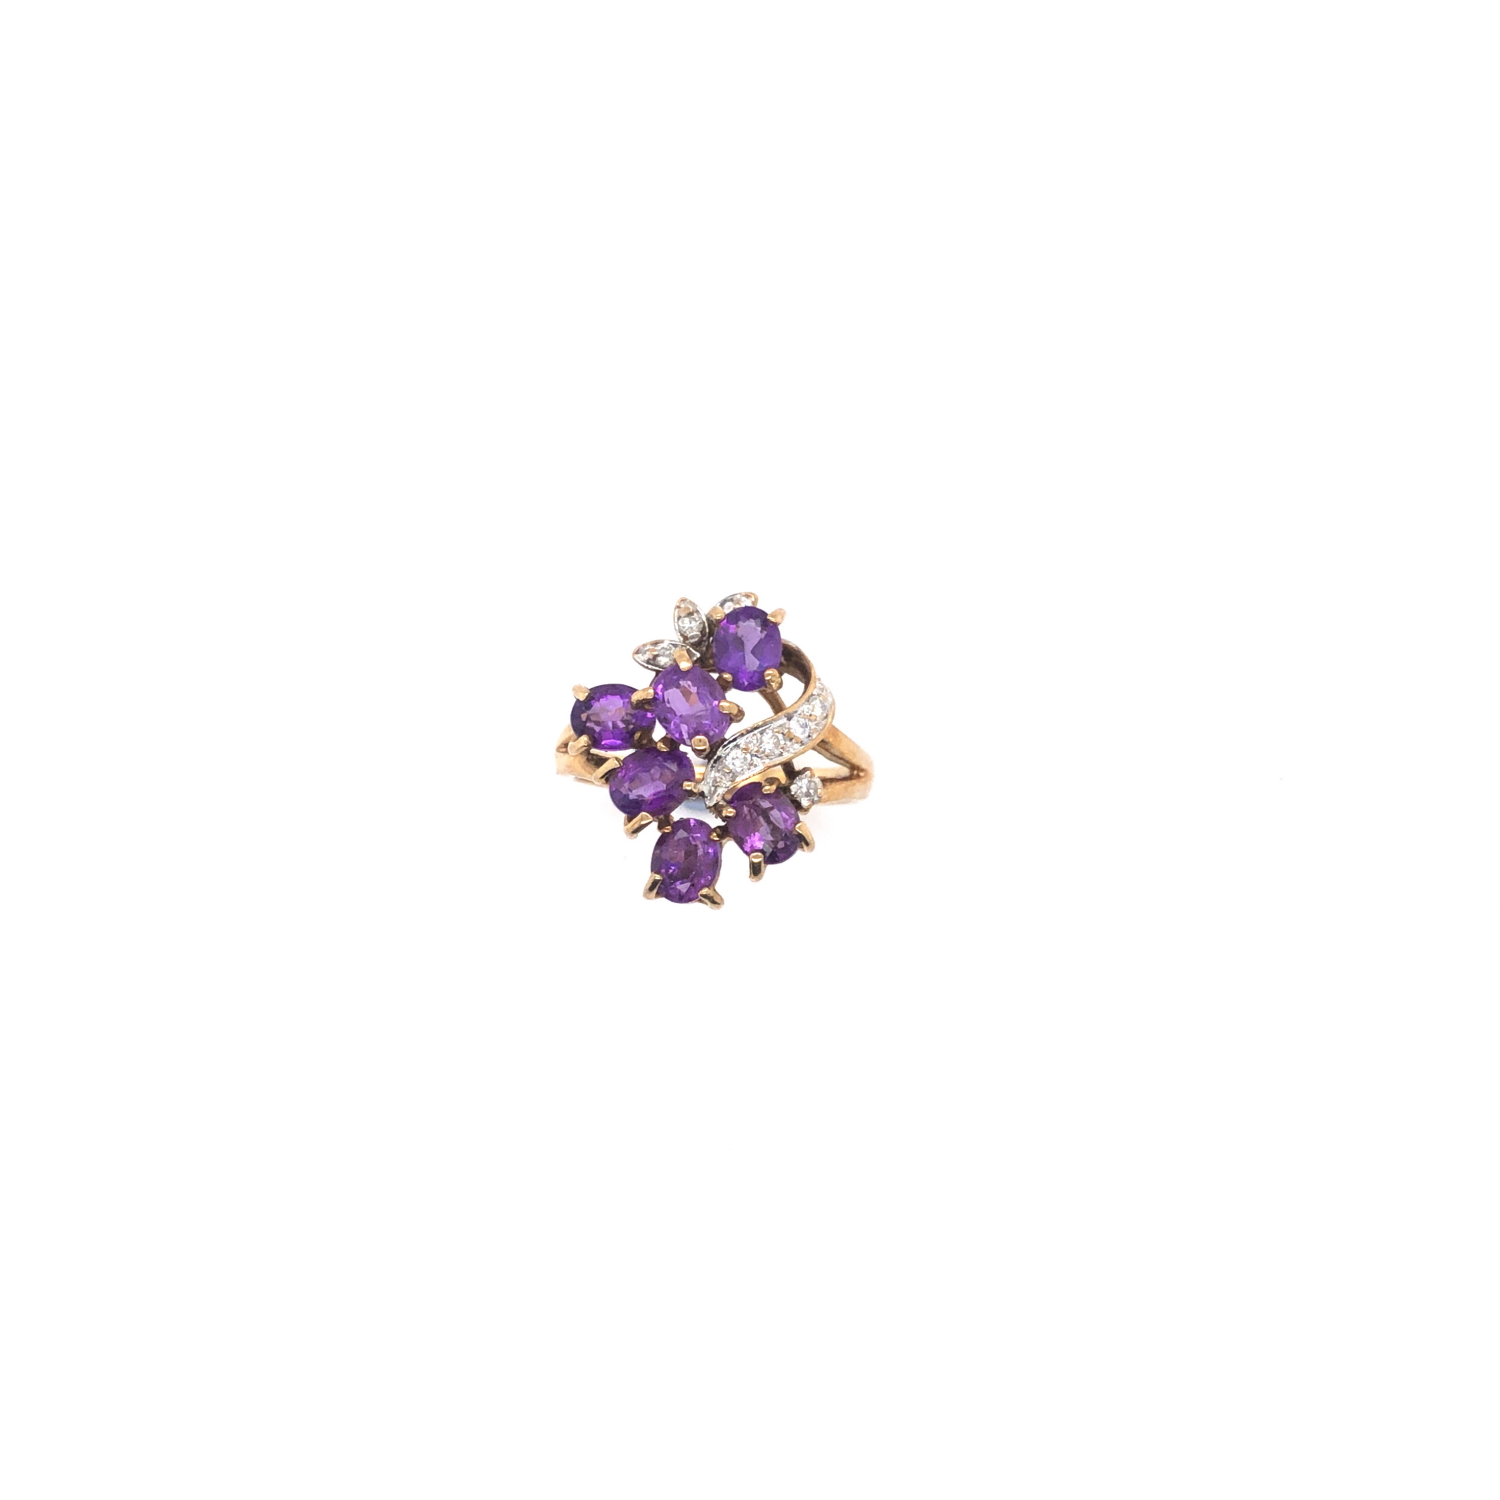 A VINTAGE HALLMARKED 9ct GOLD AMETHYST AND DIAMOND ASYMMETRIC FOLIATE DESIGN RING. DATED 1992, - Image 3 of 5